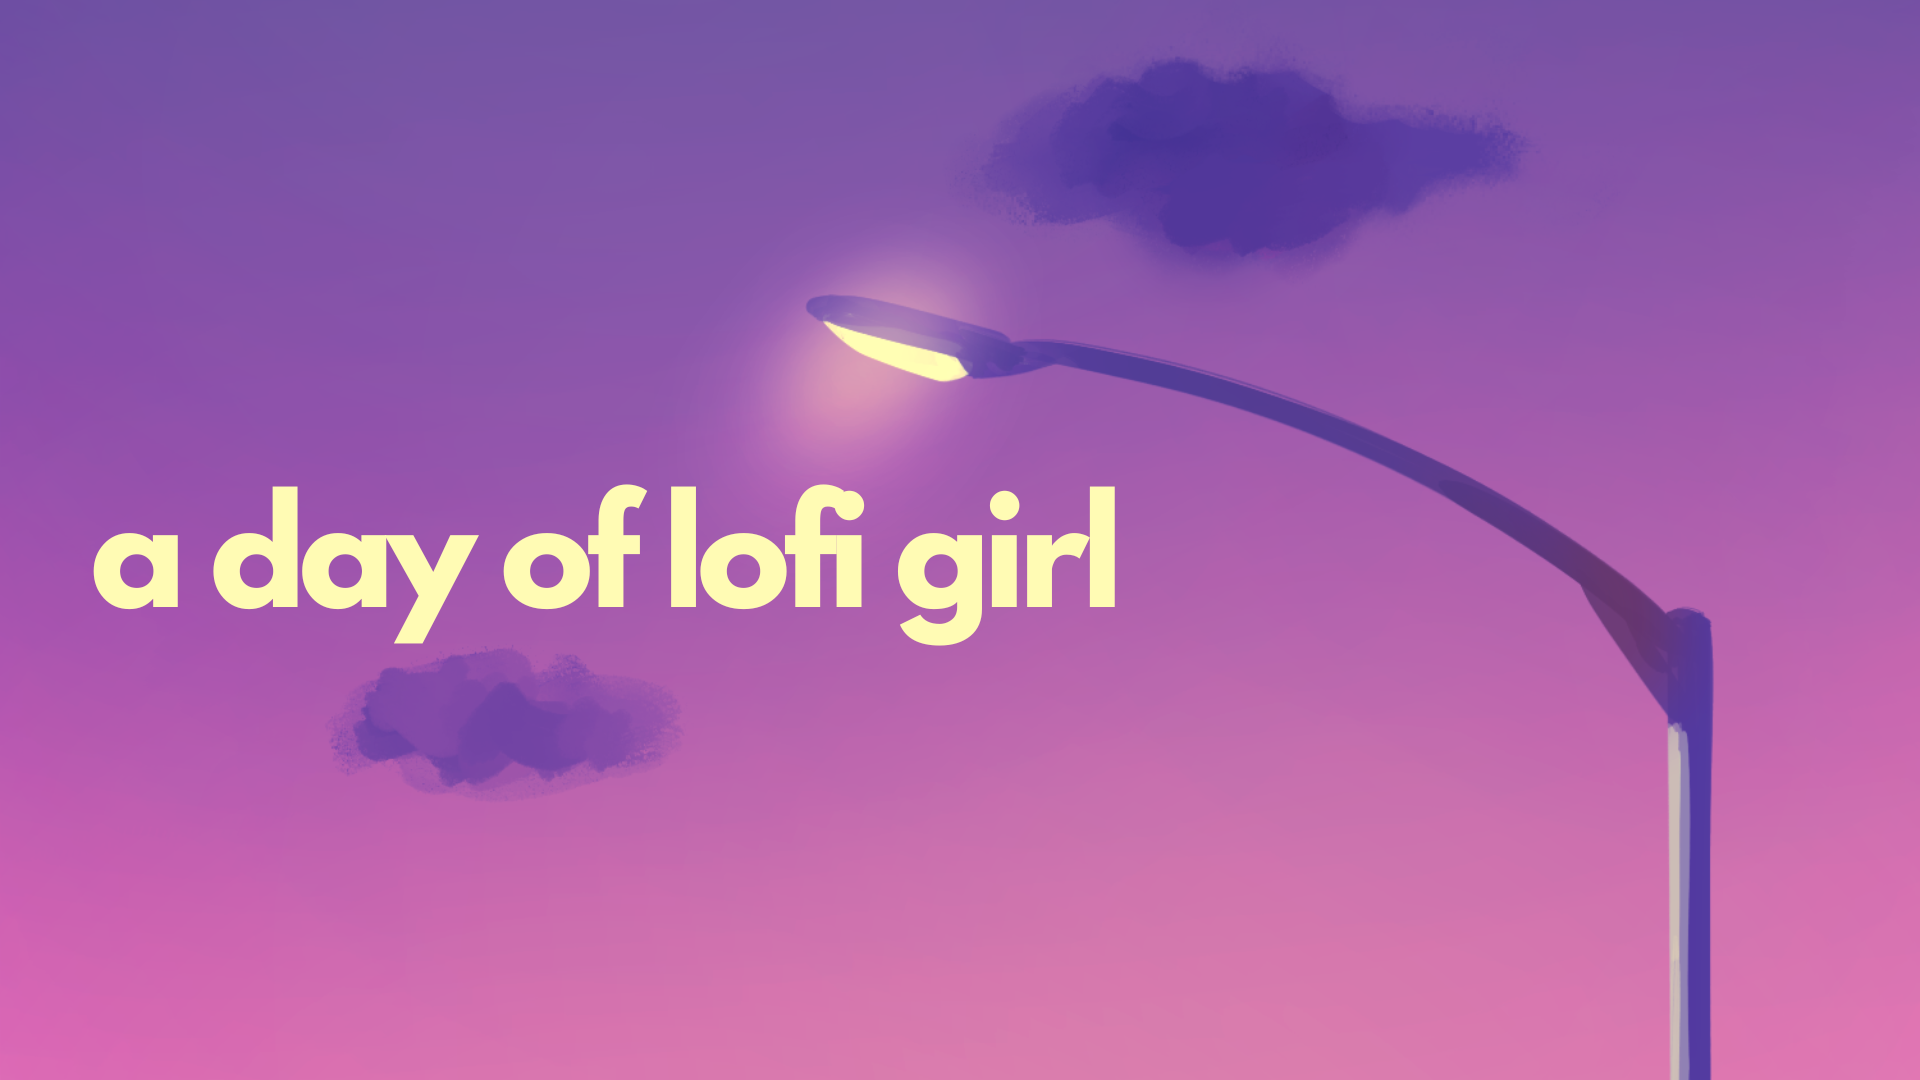 A Day of Lofi Girl (Made in PowerPoint)